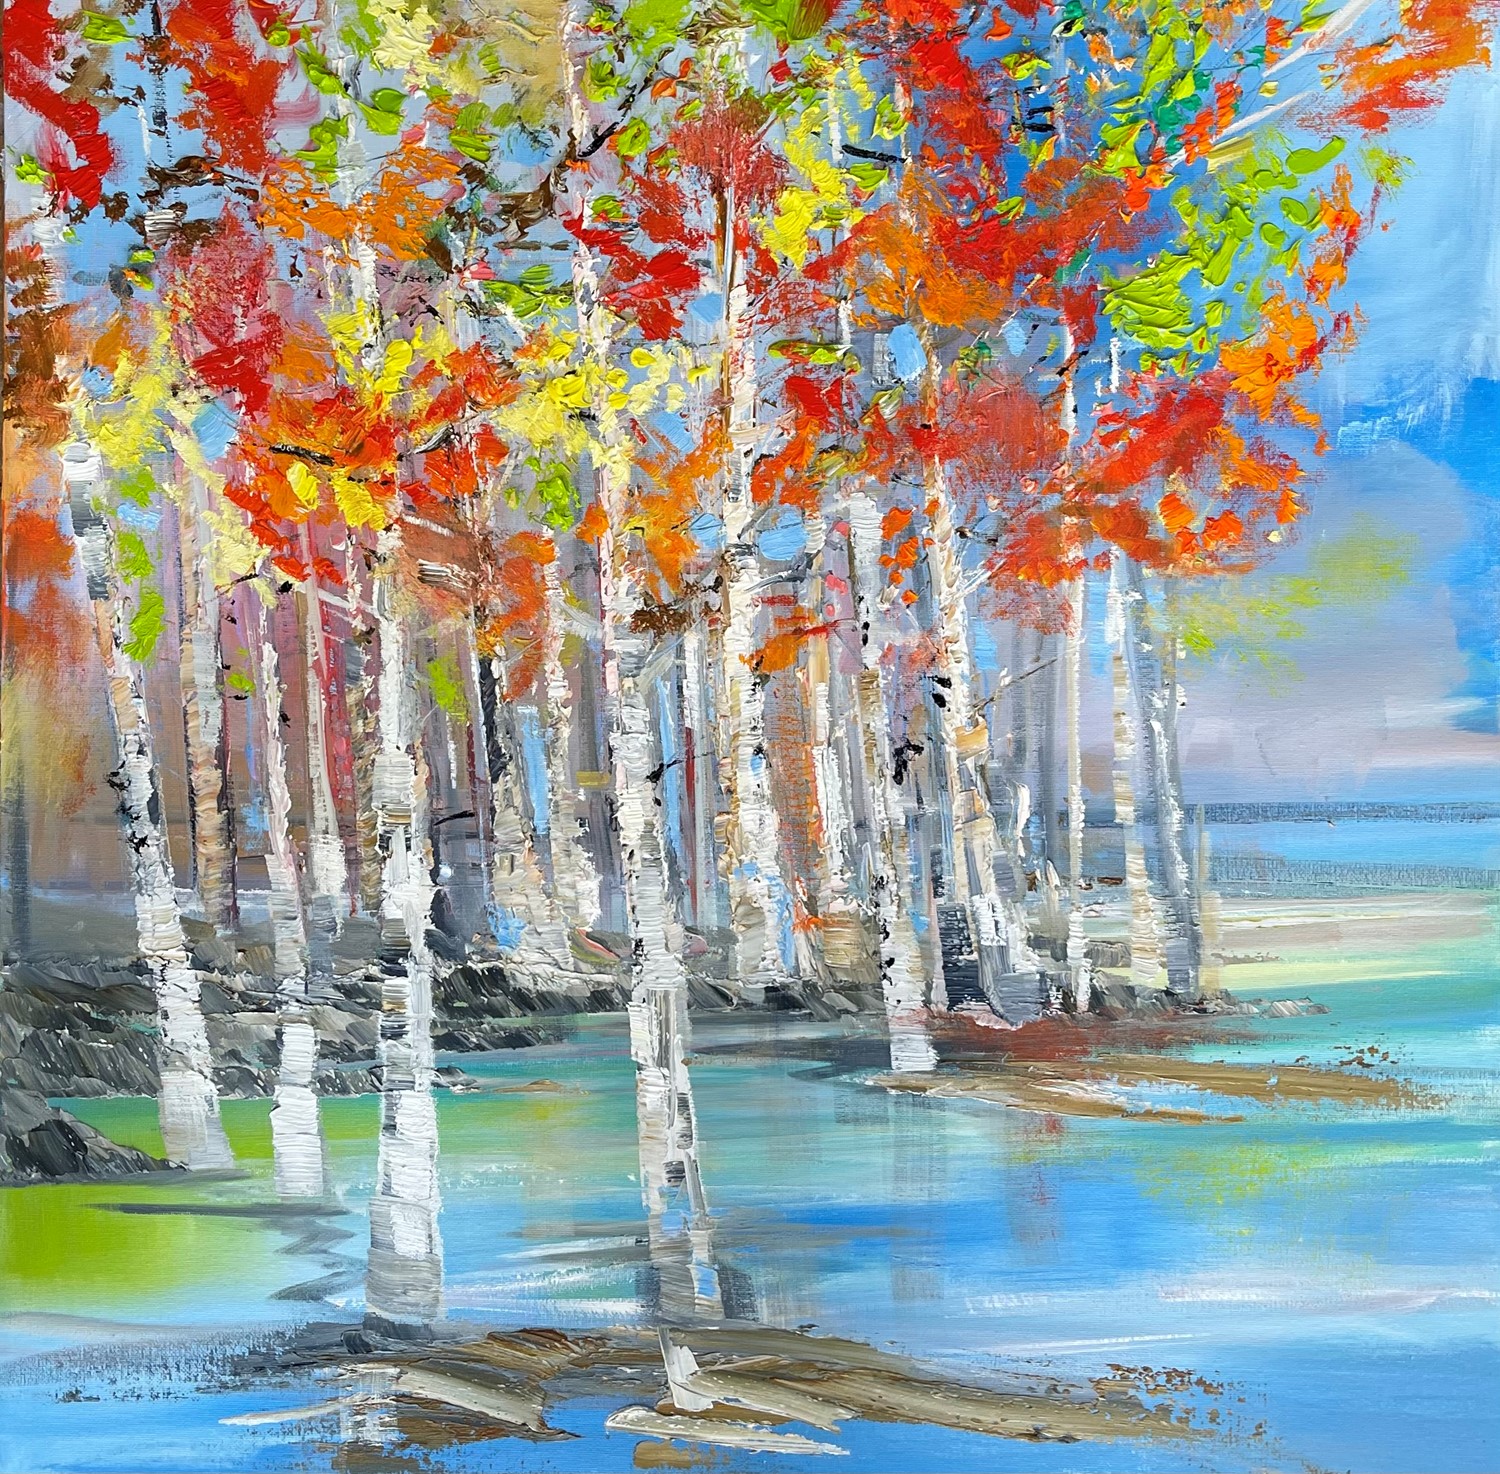 'Turning Autumnal' by artist Rosanne Barr